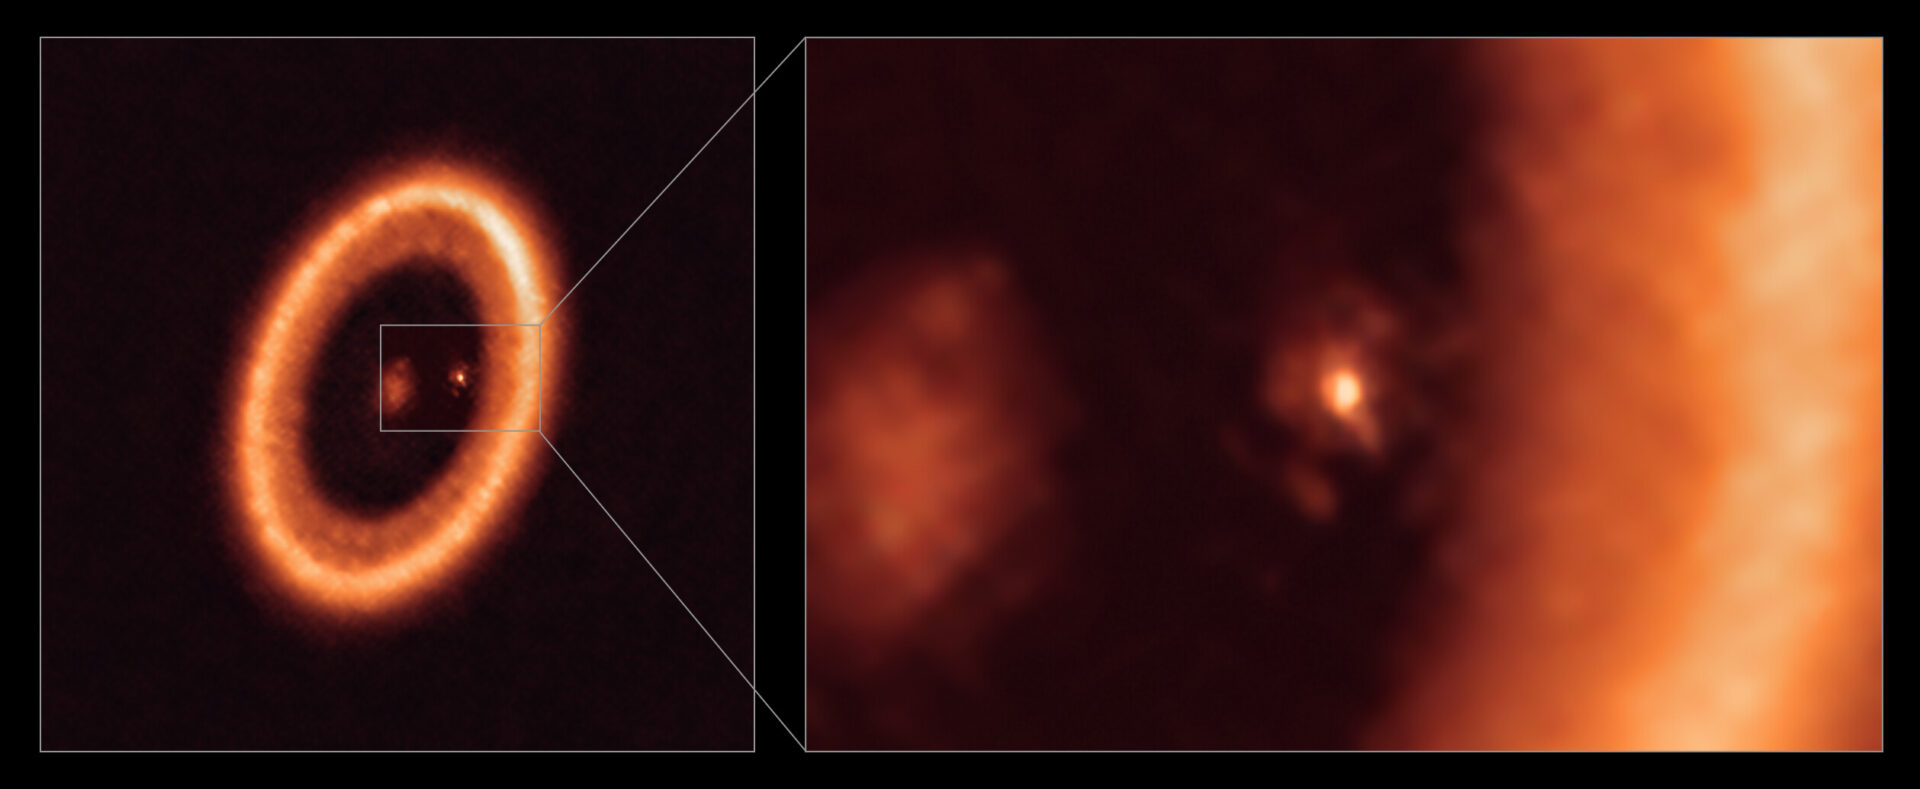 <p>This image, taken with the Atacama Large Millimeter/submillimeter Array (ALMA), in which ESO is a partner, shows wide (left) and close-up (right) views of the moon-forming disc surrounding PDS 70c, a young Jupiter-like planet nearly 400 light-years away. The close-up view shows PDS 70c and its circumplanetary disc centre-front, with the larger circumstellar ring-like disc taking up most of the right-hand side of the image. The star PDS 70 is at the centre of the wide-view image on the left.</p>
<p>Two planets have been found in the system, PDS 70c and PDS 70b, the latter not being visible in this image. They have carved a cavity in the circumstellar disc as they gobbled up material from the disc itself, growing in size. In this process, PDS 70c acquired its own circumplanetary disc, which contributes to the growth of the planet and where moons can form. This circumplanetary disc is as large as the Sun-Earth distance and has enough mass to form up to three satellites the size of the Moon.</p>
<p>Credit:<br />
ALMA (ESO/NAOJ/NRAO)/Benisty et al.</p>
